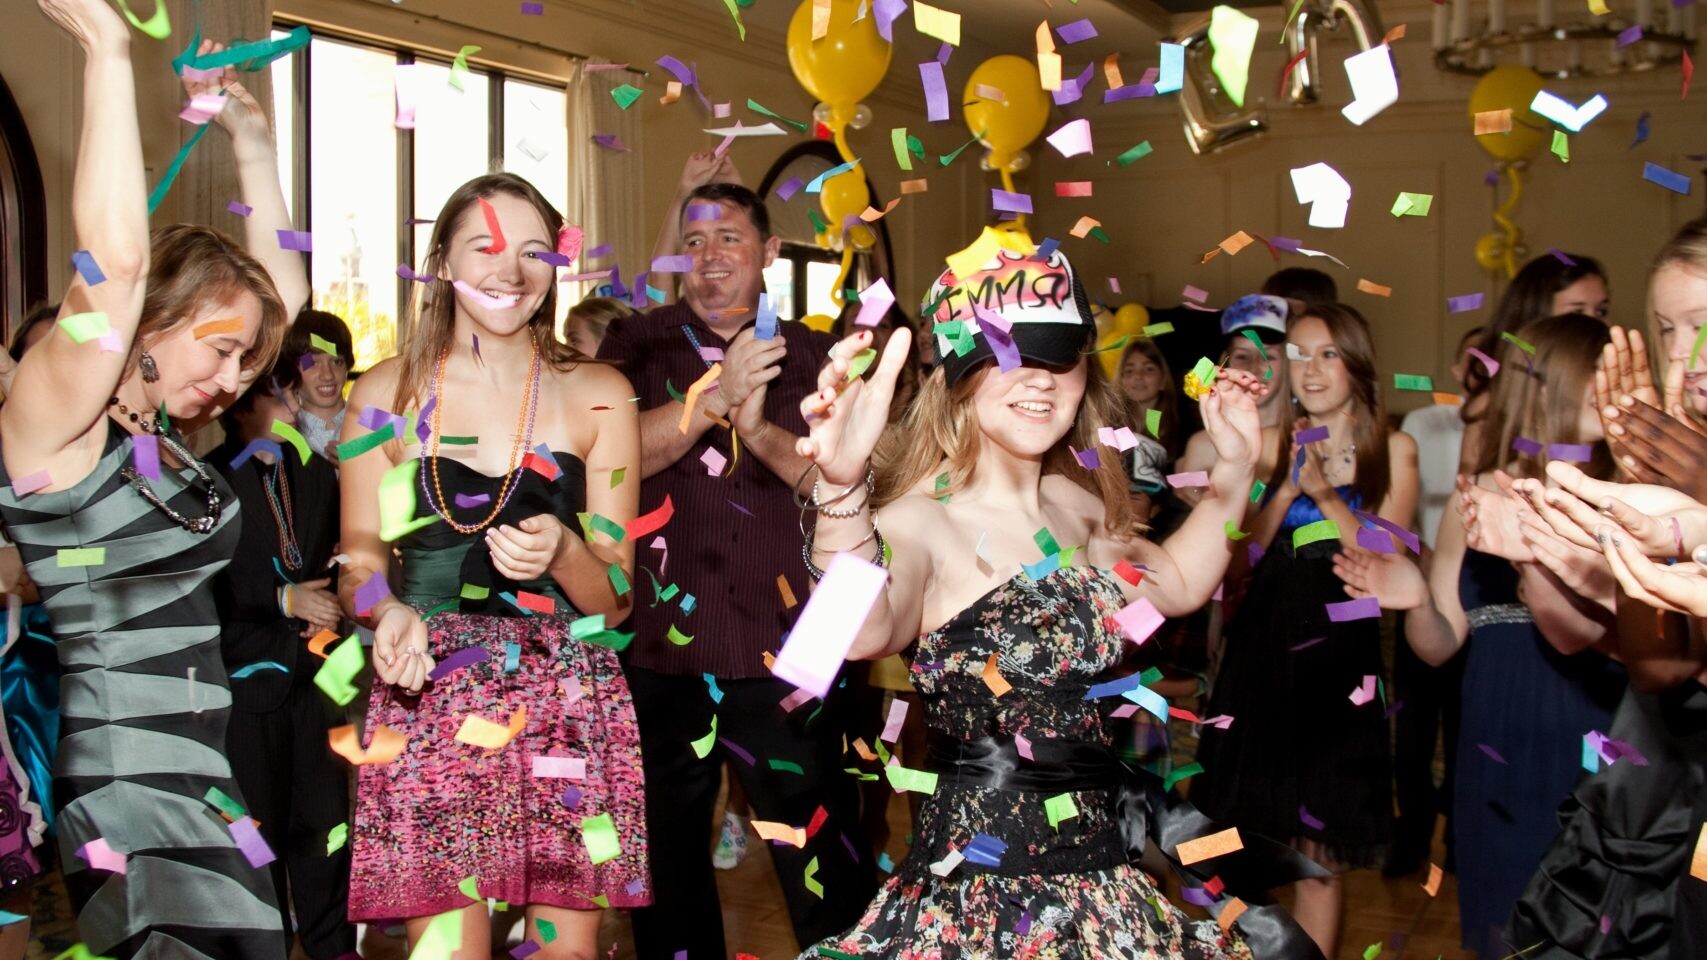 Girls smiling, clapping, dancing, and having fun at a party with confetti falling for a bar mitzvah event.